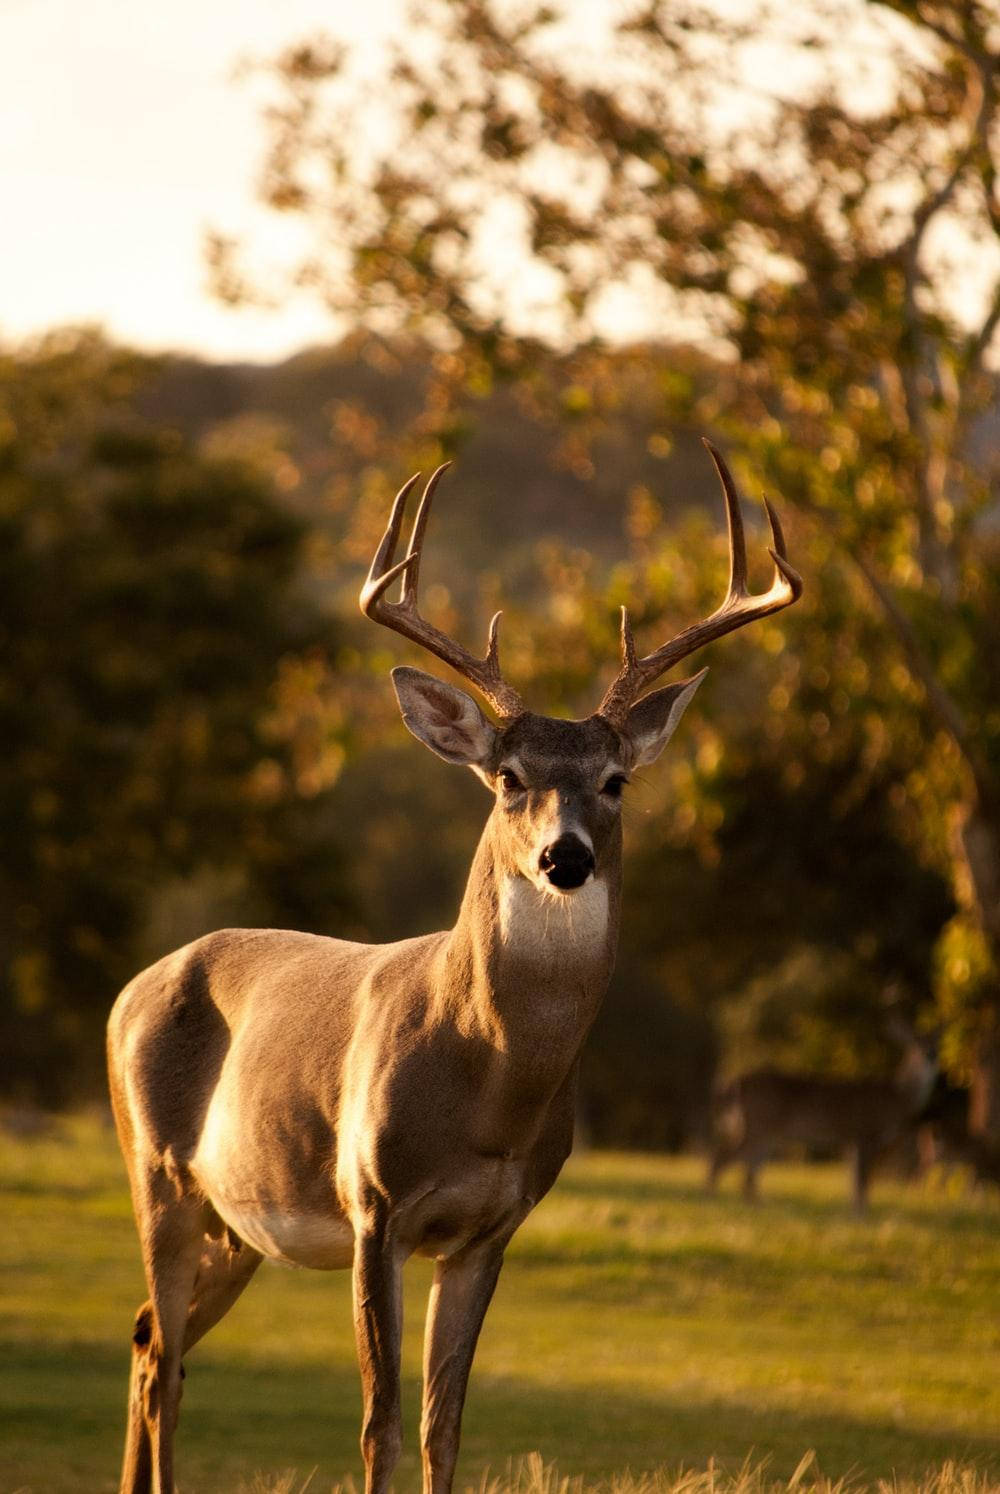 Full Hd Deer At Sunset Android Background